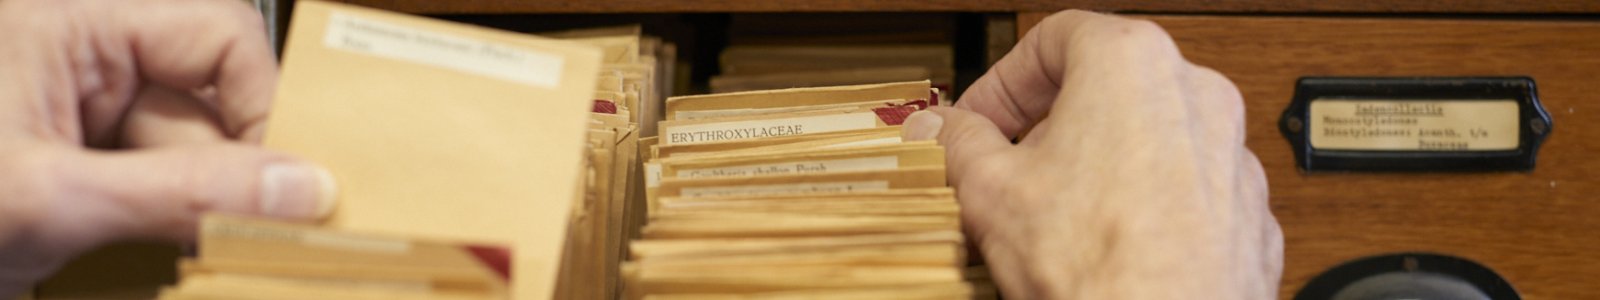 Curator searches in plant collection archive